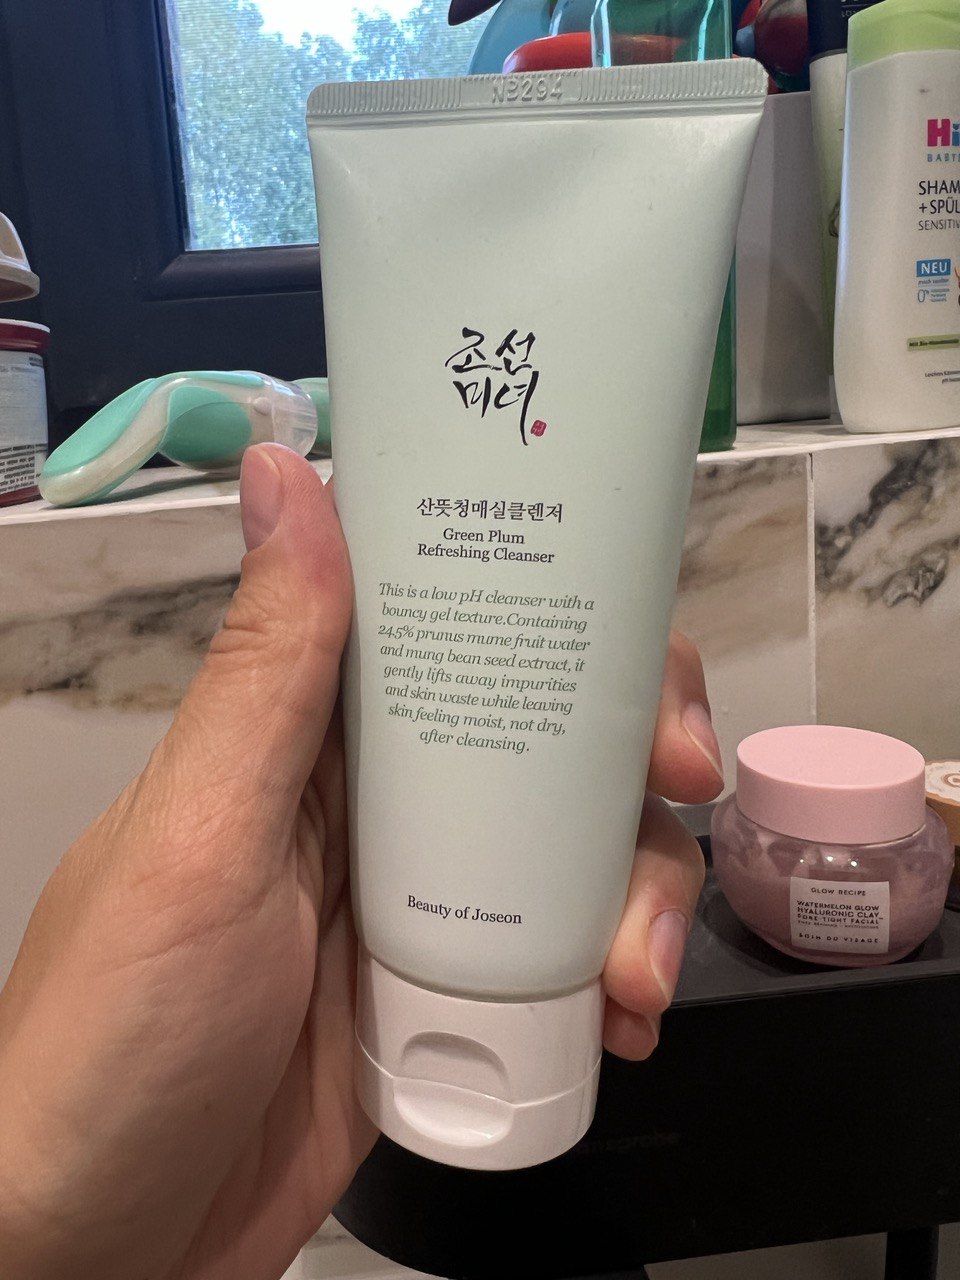 Review: A Refreshing Experience with Beauty of Joseon’s Green Plum Refreshing Cleanser